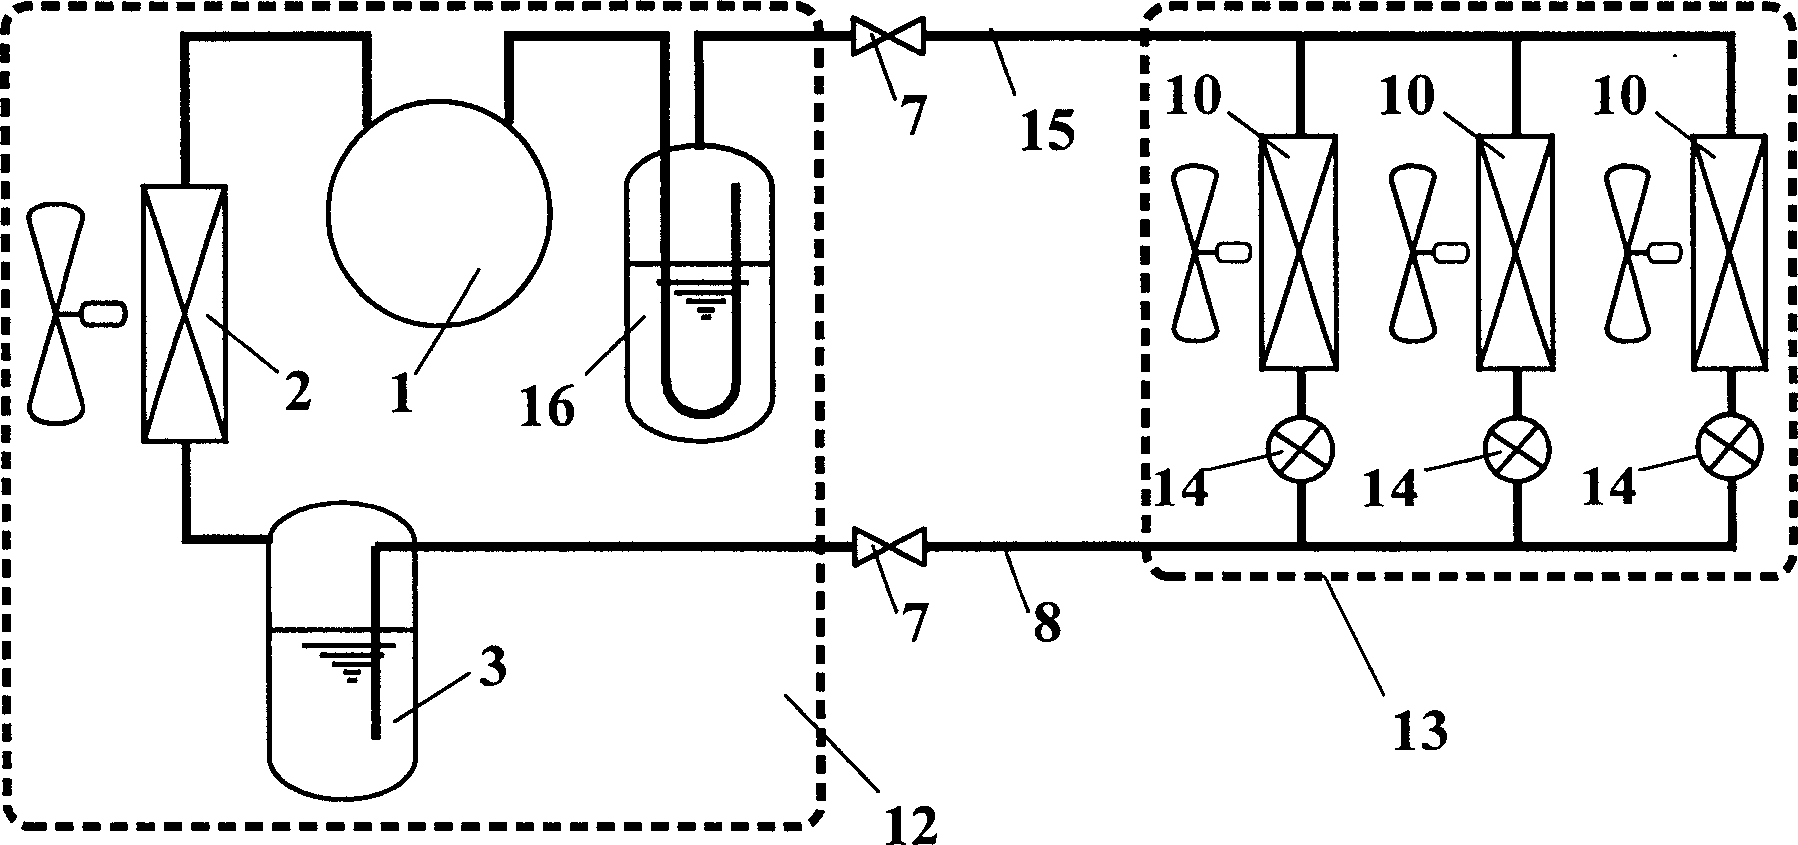 Multi-connected air conditioning unit with liquid pump to supply refrigerant